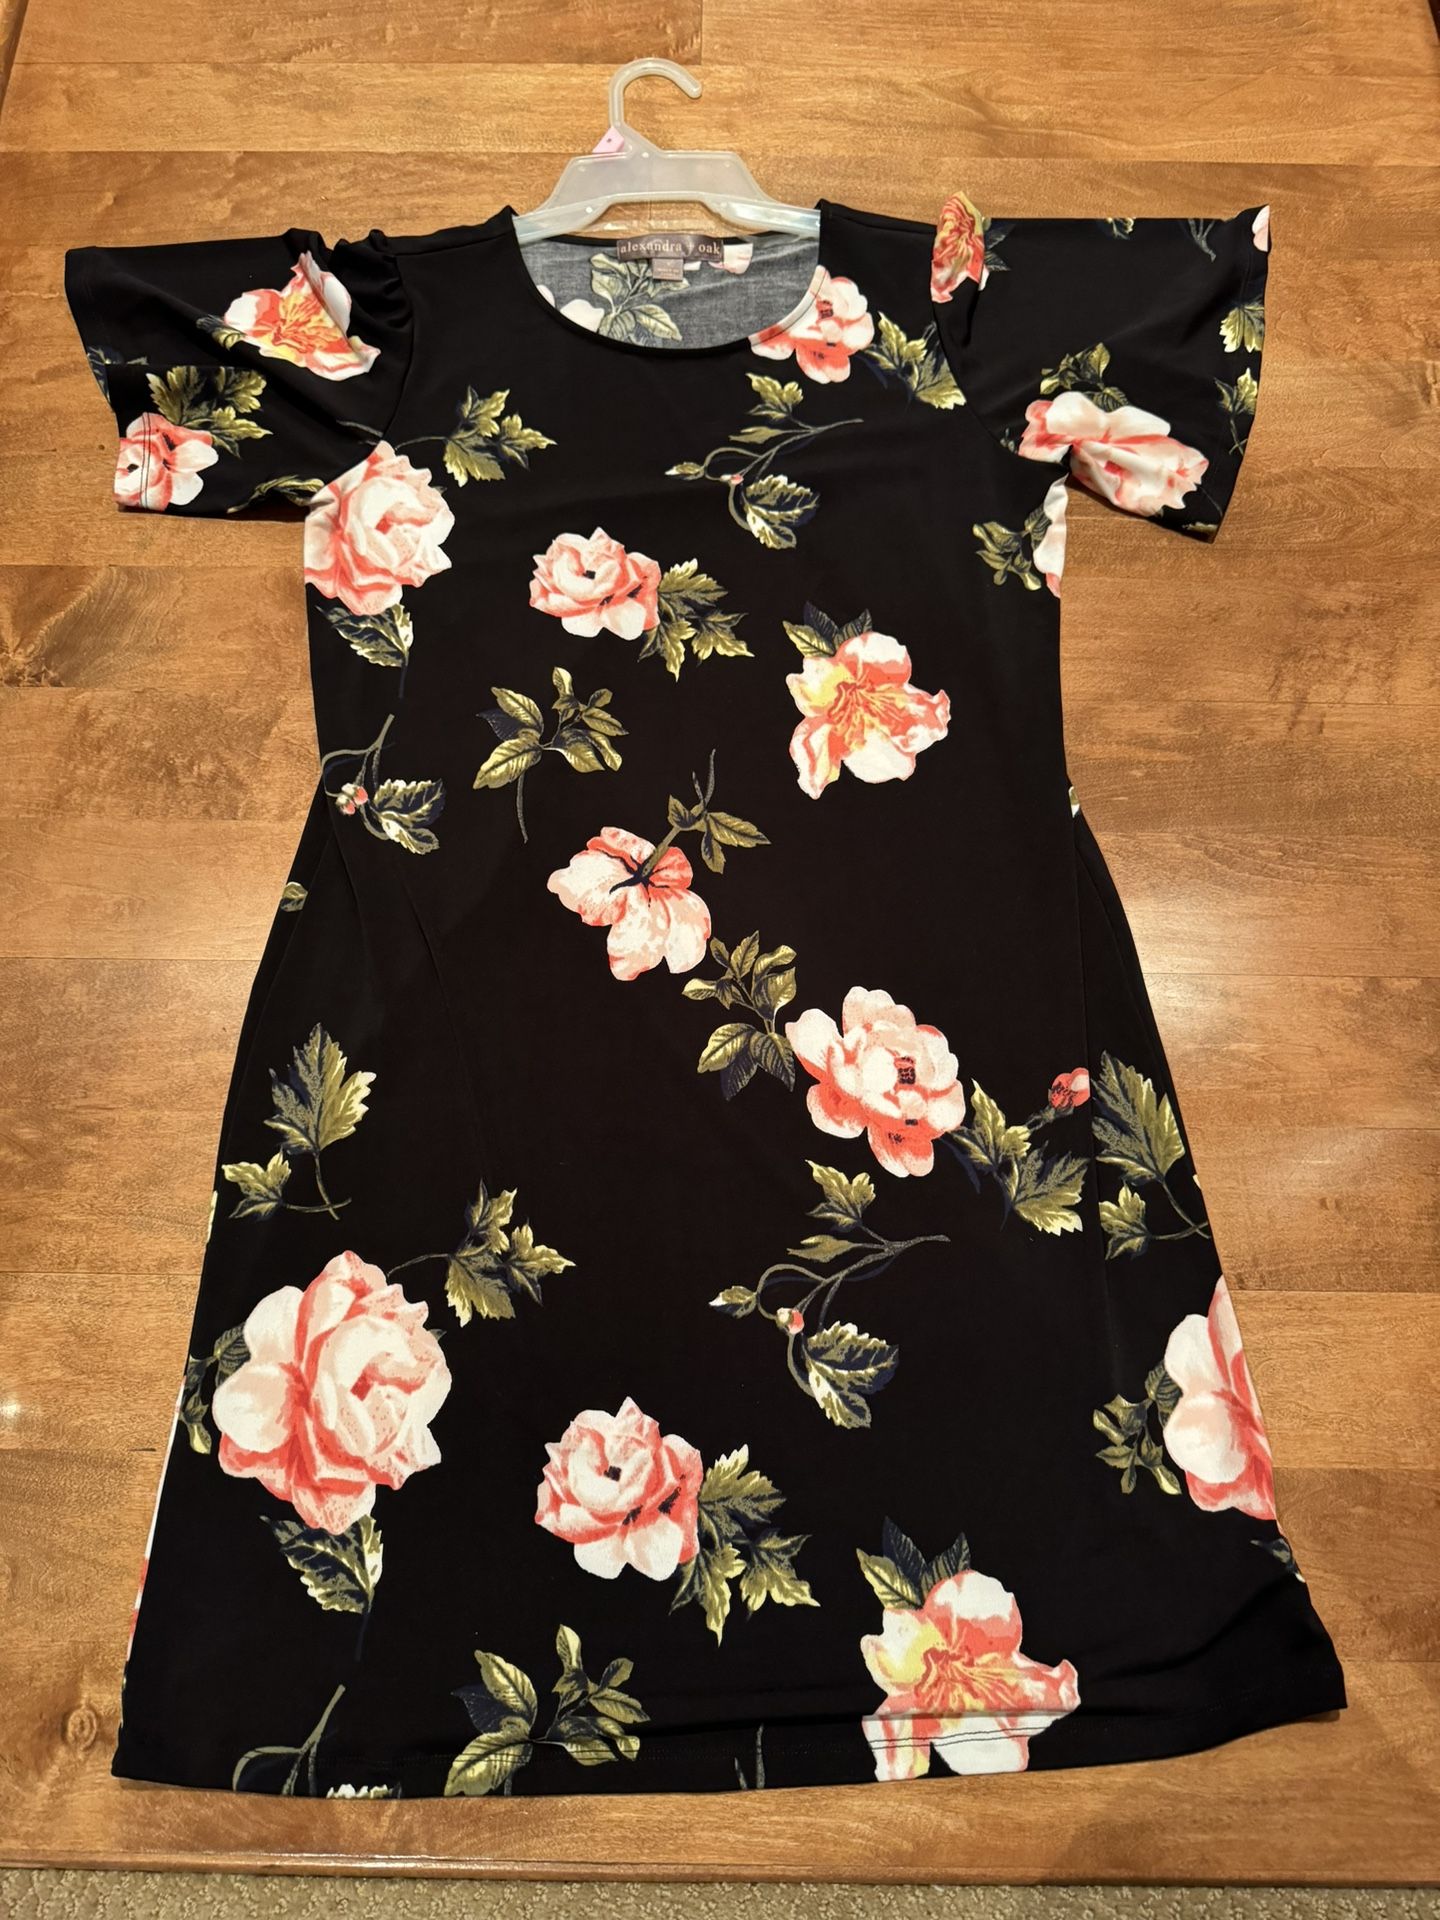 Woman’s Floral Dress New Without Tags Shipping Avaialbe 